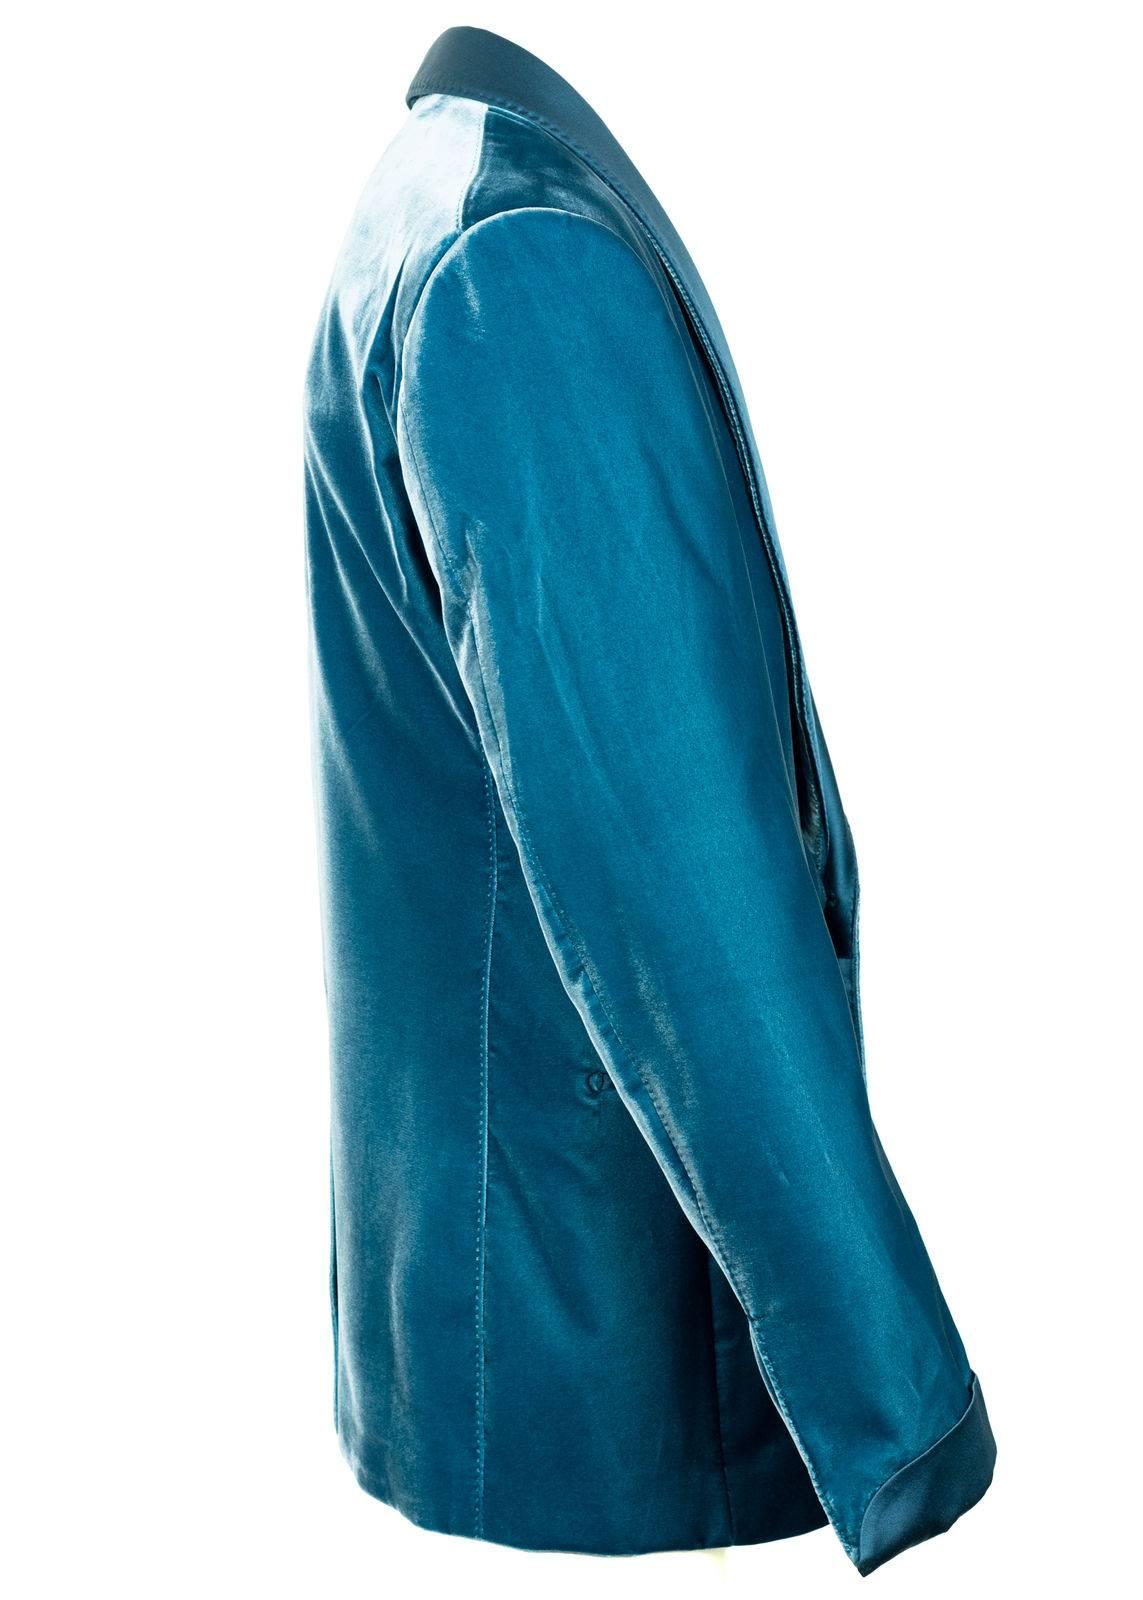 Tom Ford Aqua Blue Velvet Shawl Lapel Shelton Cocktail Jacket Sz52R/42R RTL$3980 In Excellent Condition For Sale In Brooklyn, NY